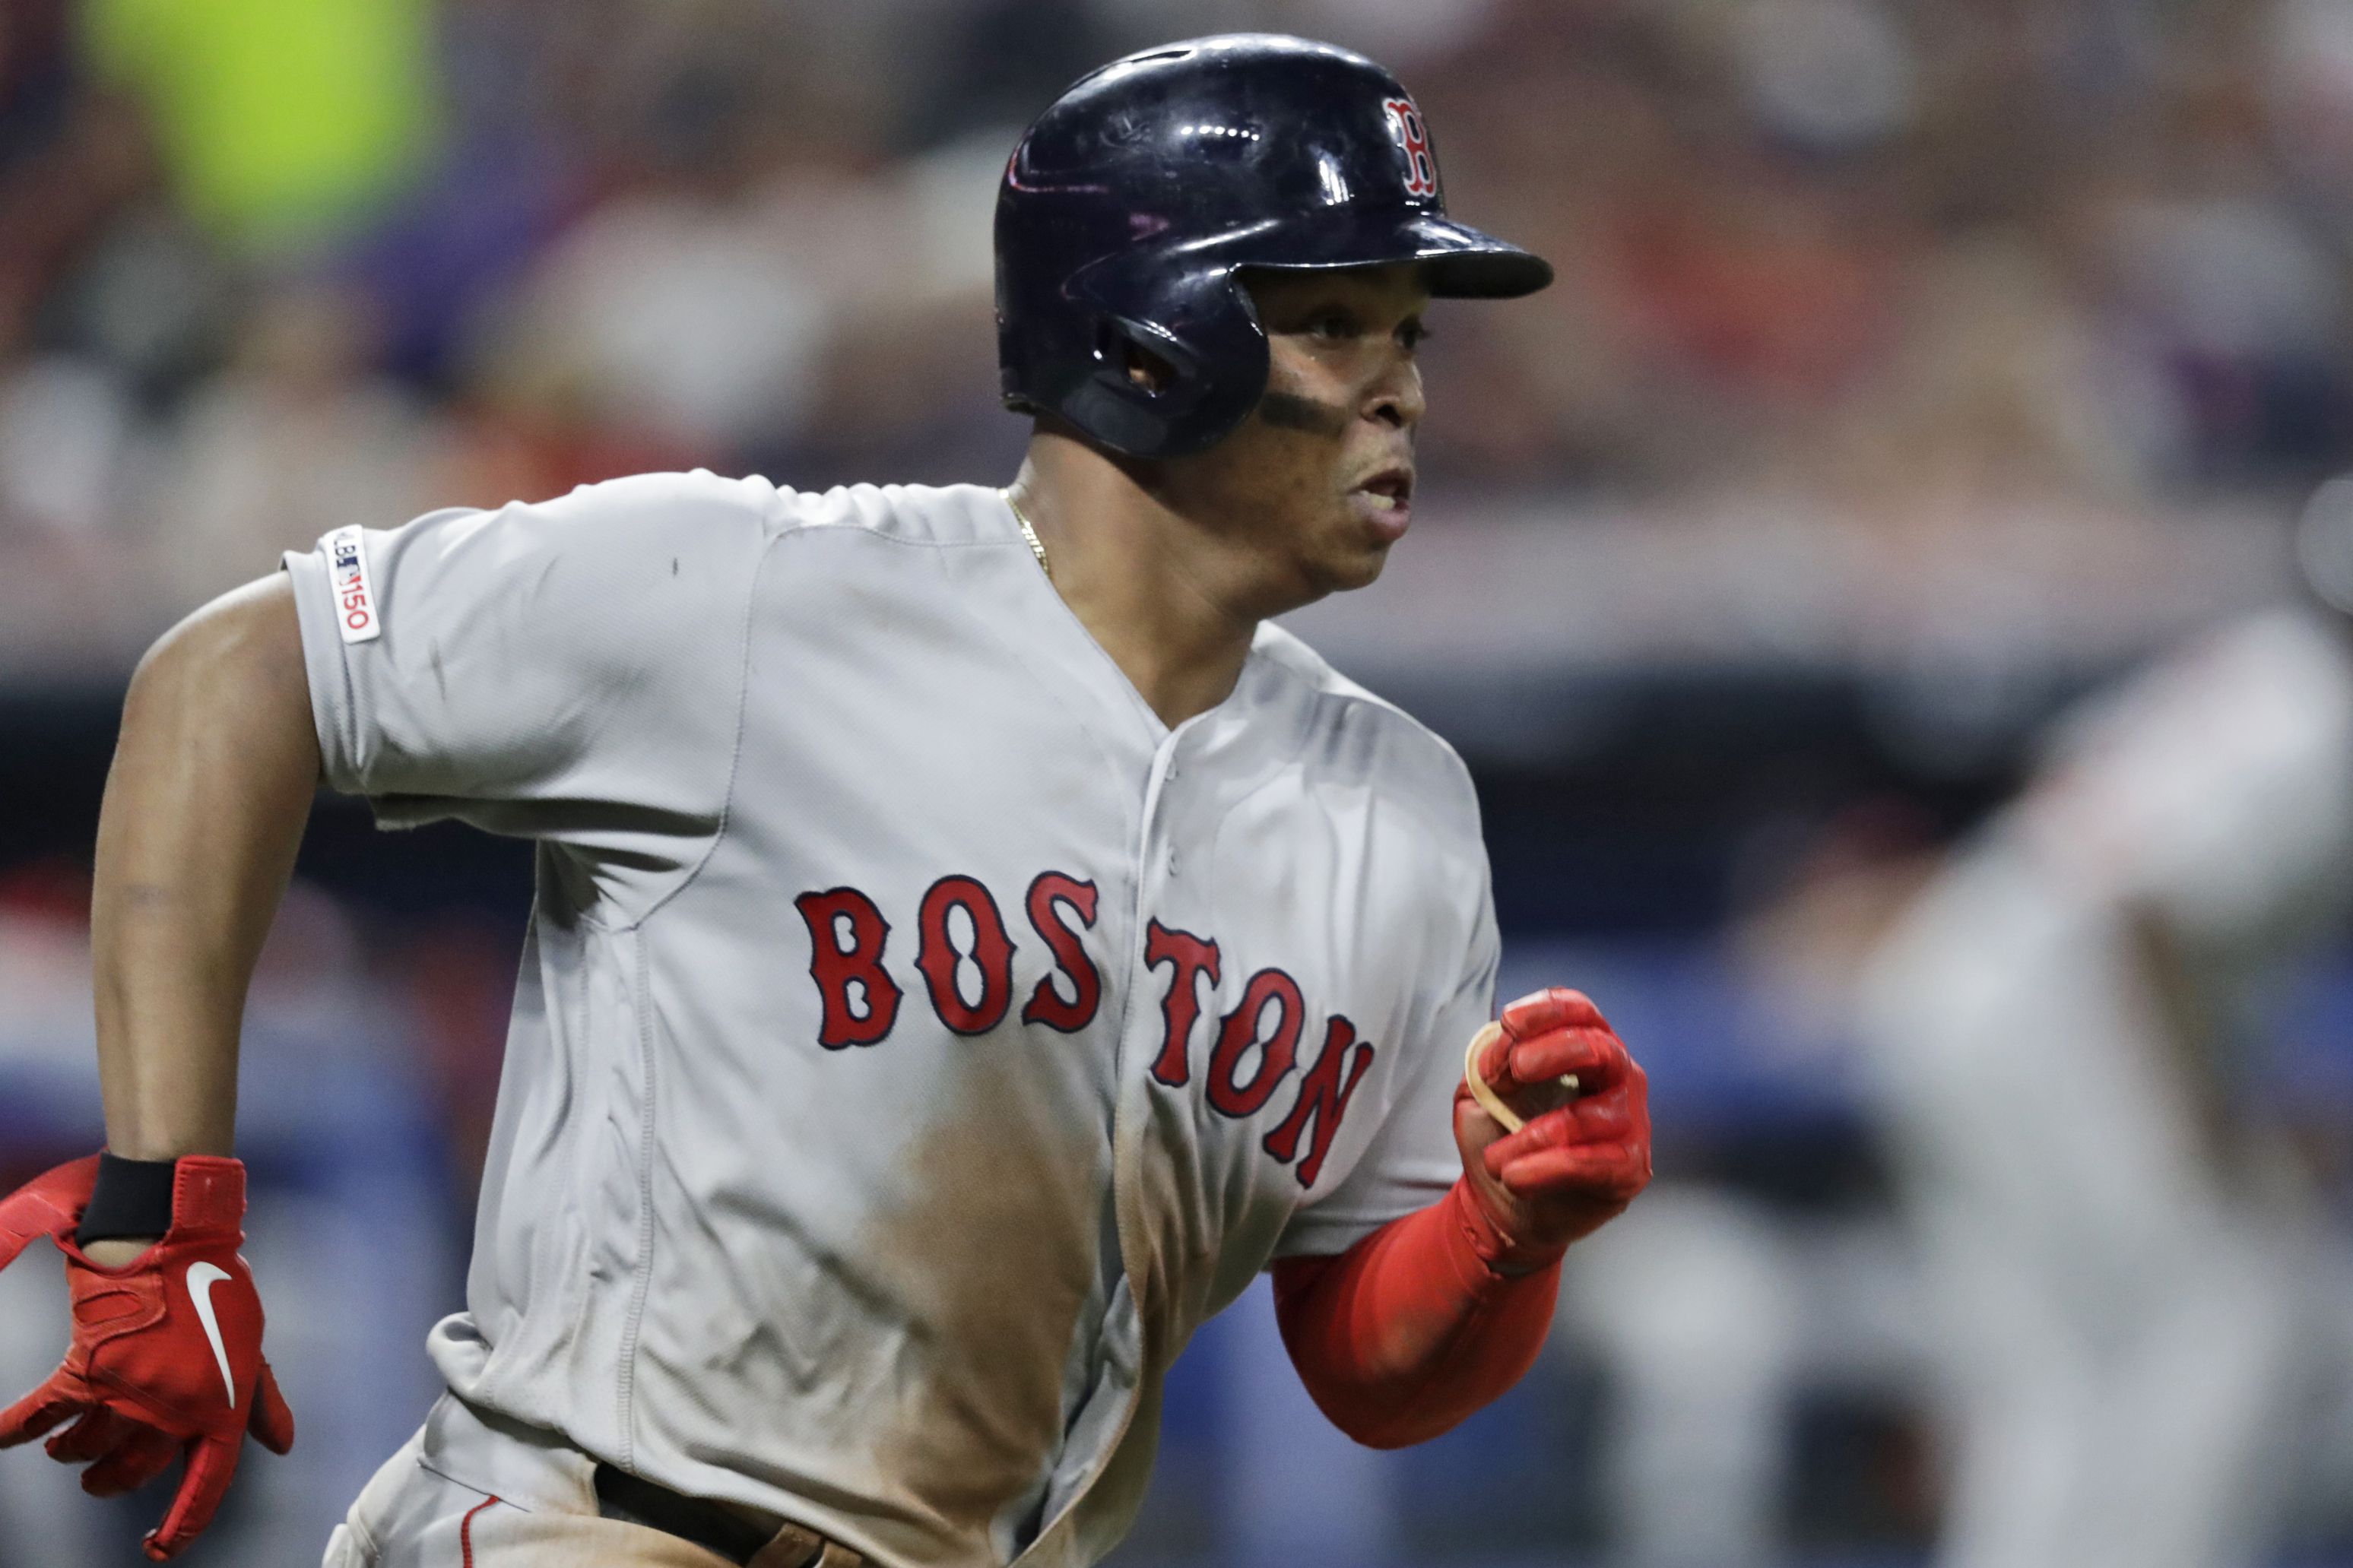 Red Sox on X: For the first time in his career, Rafael Devers is